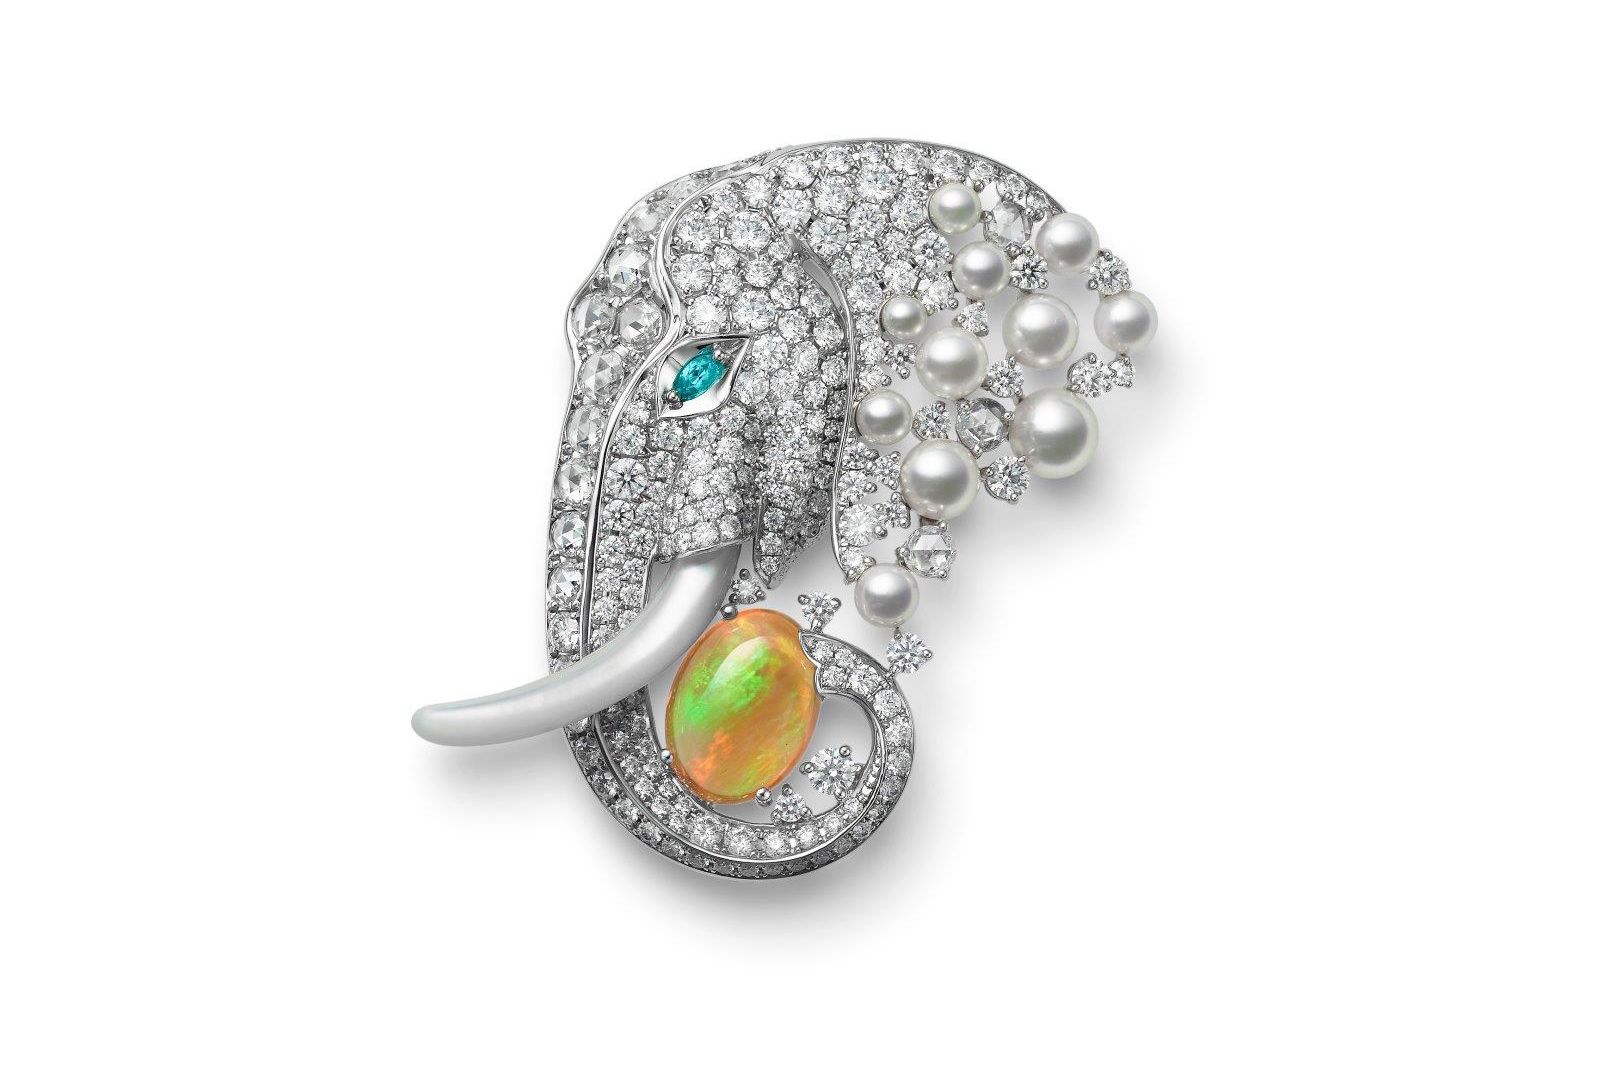 Mikimoto Elephant brooch in white gold, Akoya cultured pearl, opal, tourmaline, mother of pearl and diamond from the Wild and Wonderful High Jewellery collection